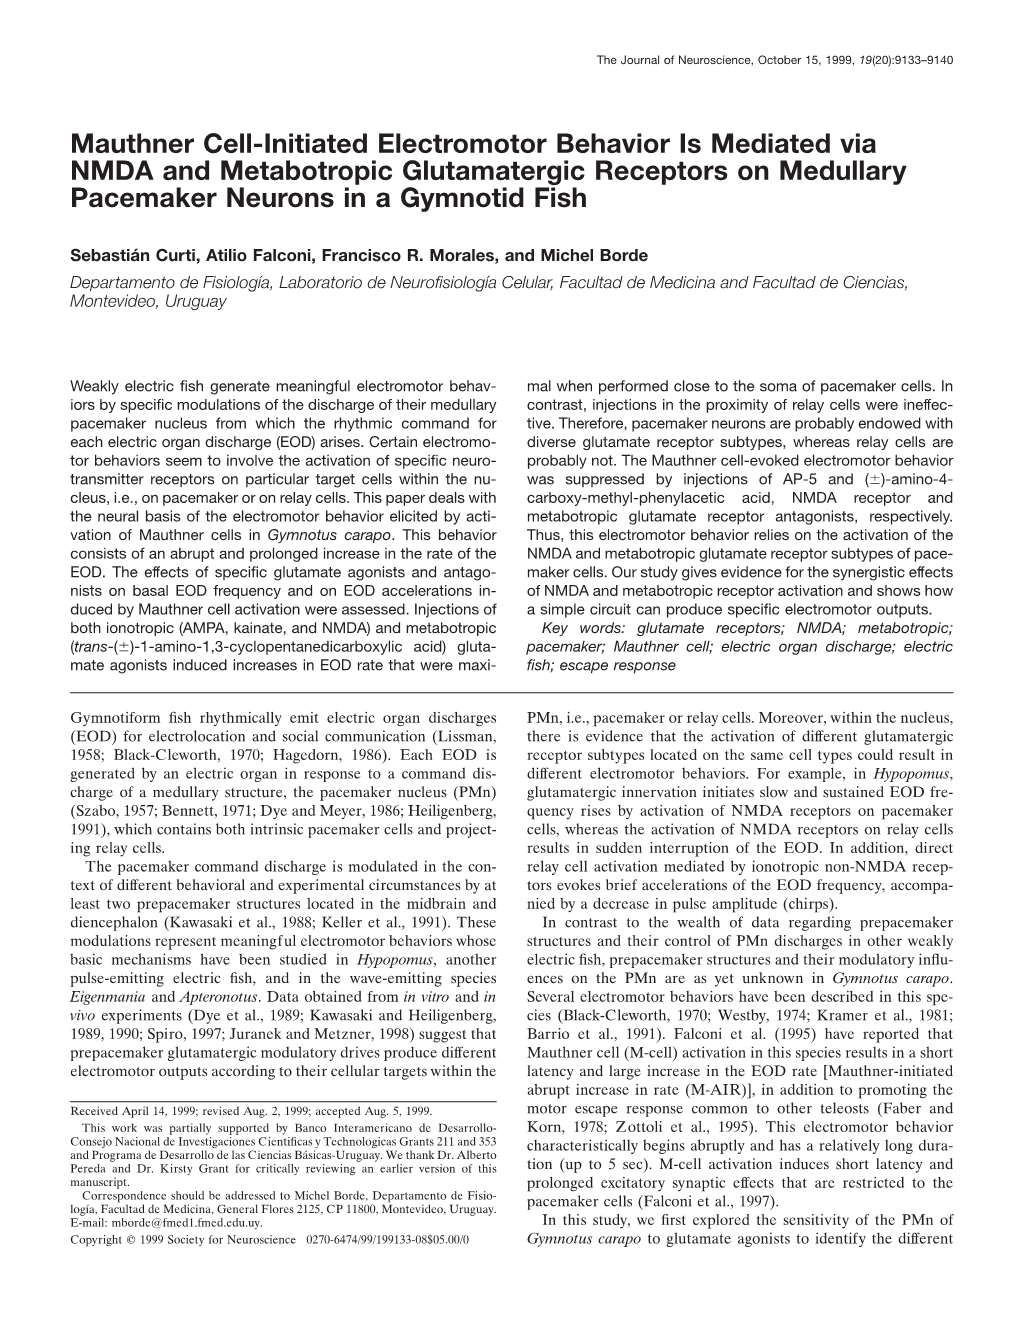 Mauthner Cell-Initiated Electromotor Behavior Is Mediated Via NMDA and Metabotropic Glutamatergic Receptors on Medullary Pacemaker Neurons in a Gymnotid Fish